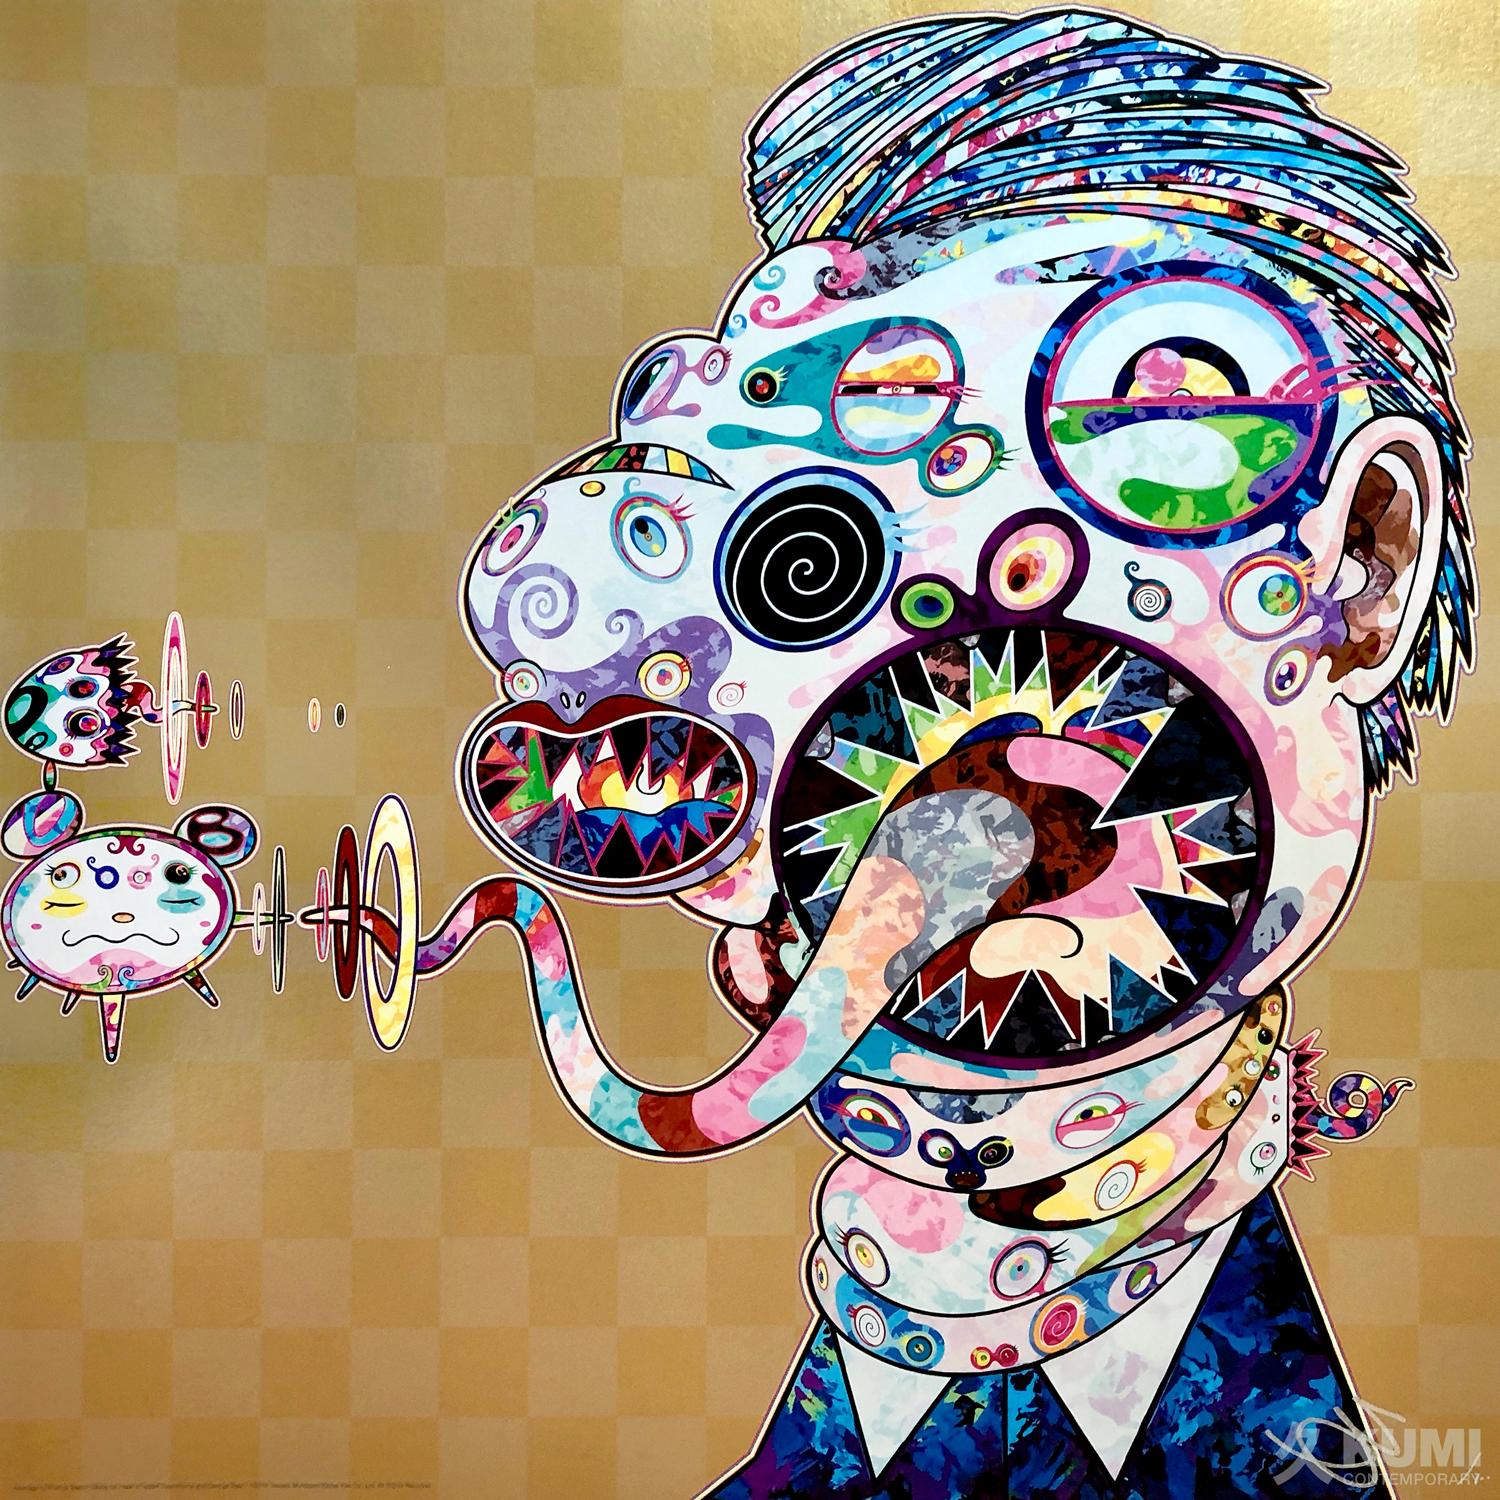 Homage to Francis Bacon, Study for Head of Isabel Rawsthorne and George Dyer  - Print by Takashi Murakami